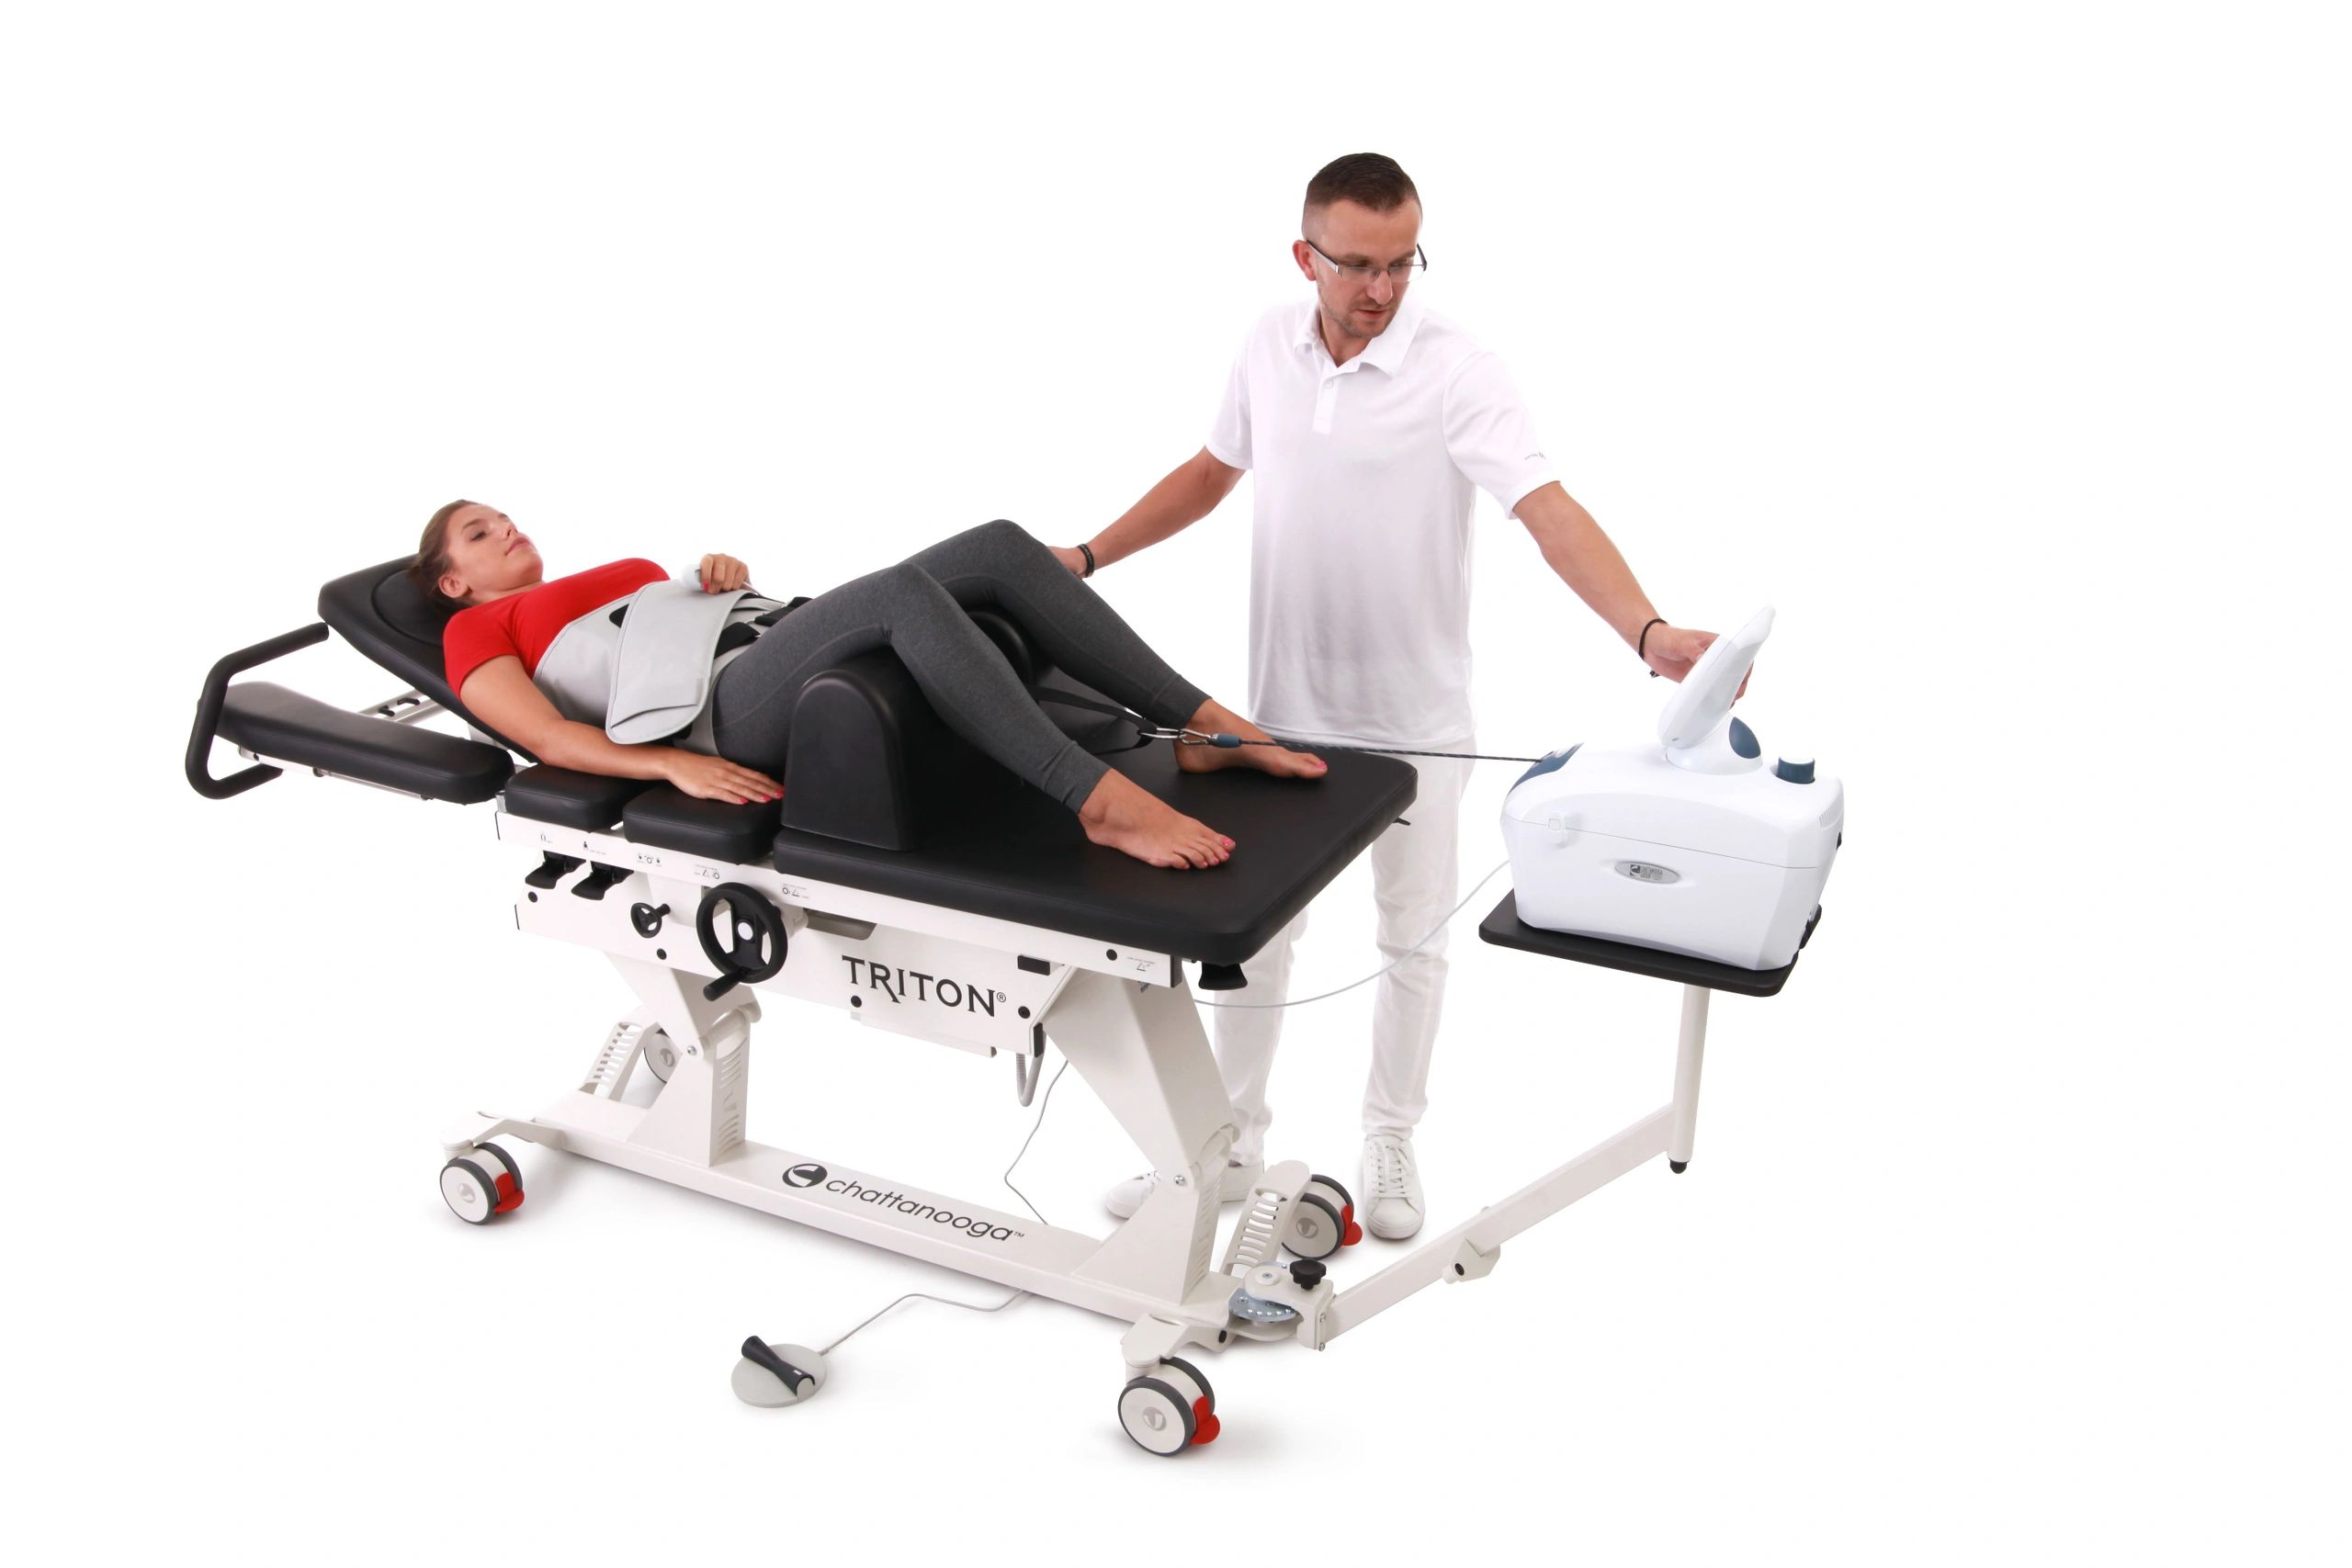 North Vancouver Spinal Decompression Therapy expla